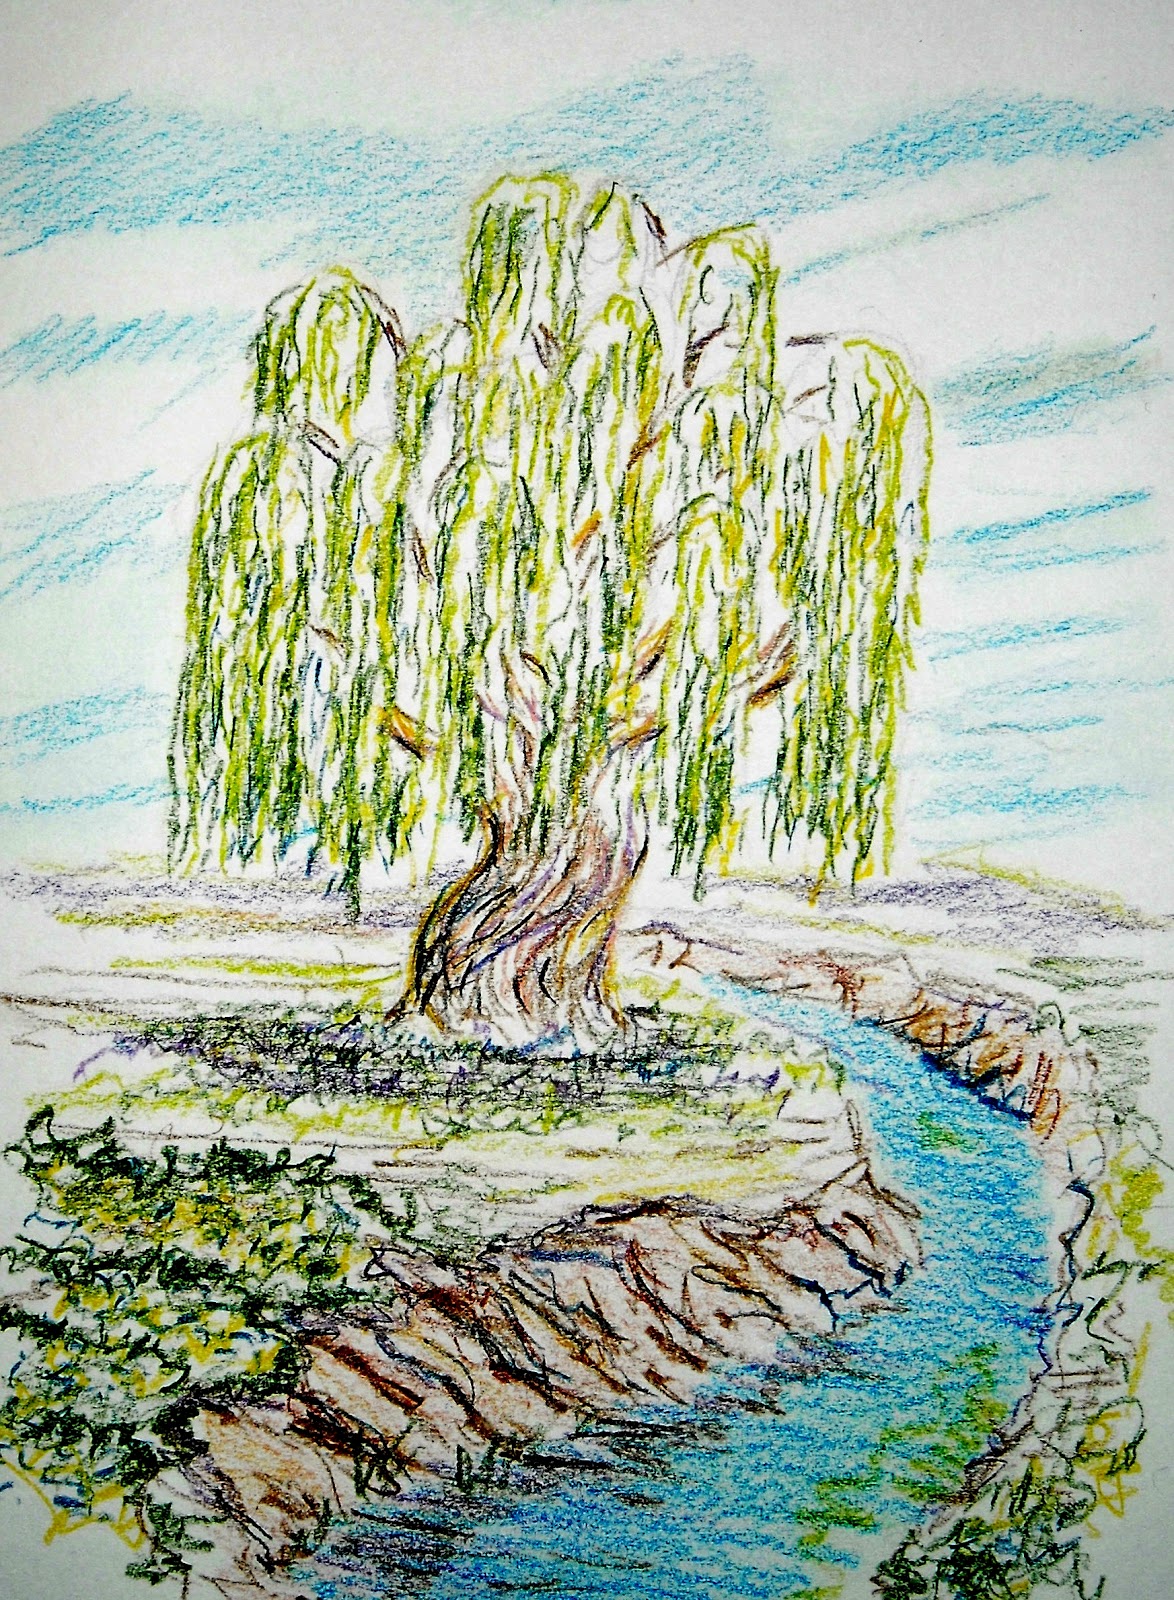 How to Draw Worksheets for The Young Artist: How to Draw a Willow Tree.